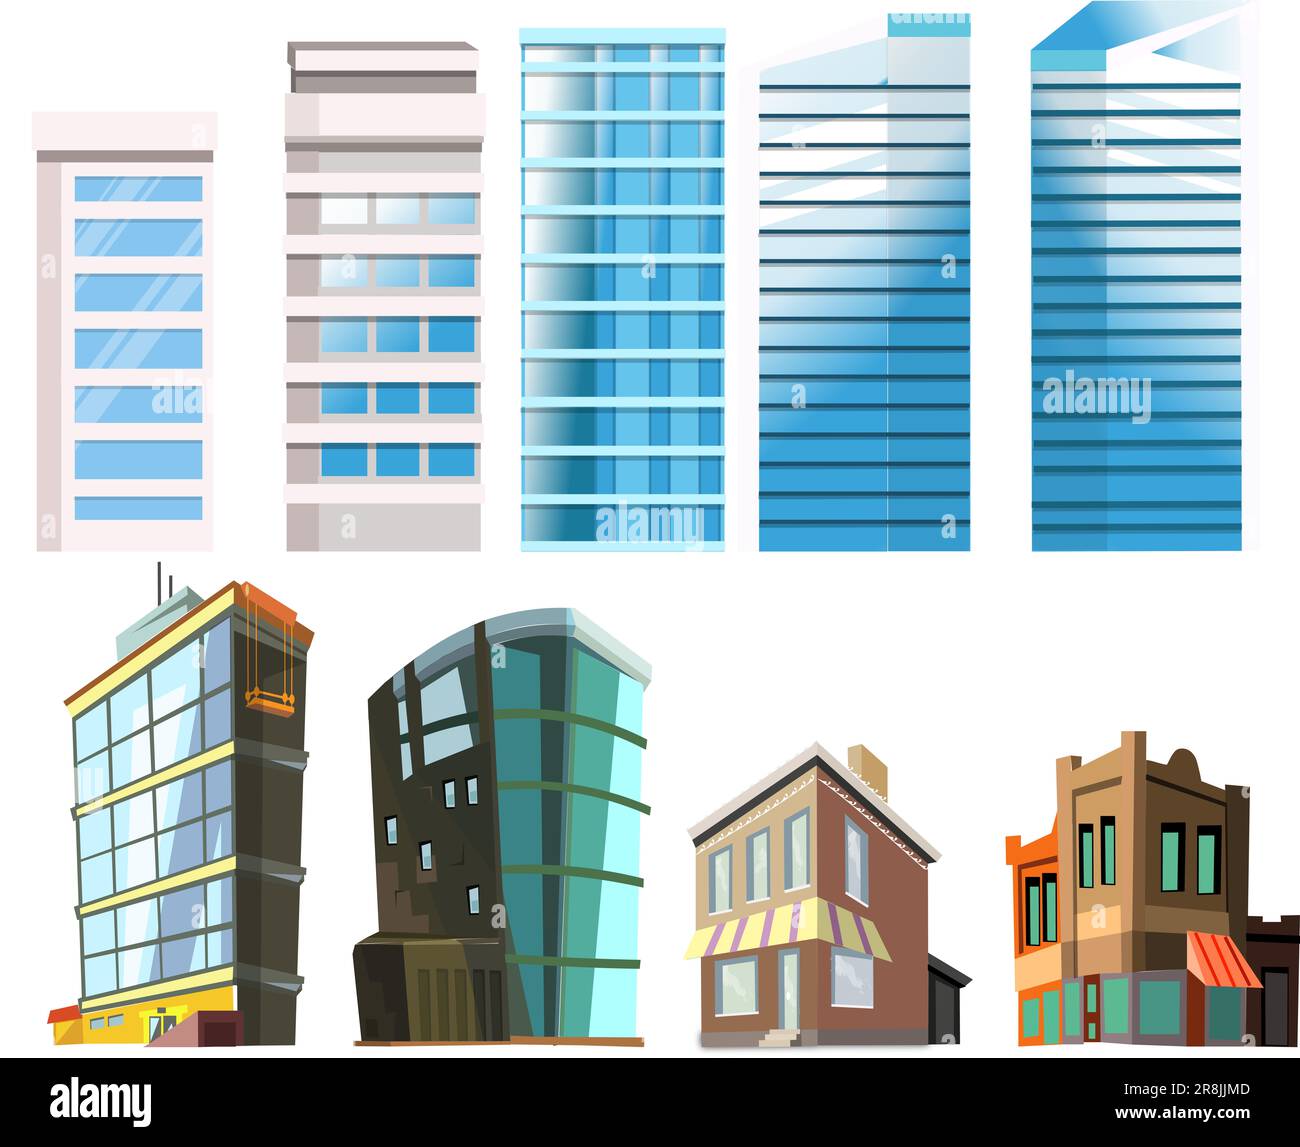 A set of colorful residential and office building cartoon illustrations set against a white background Stock Photo